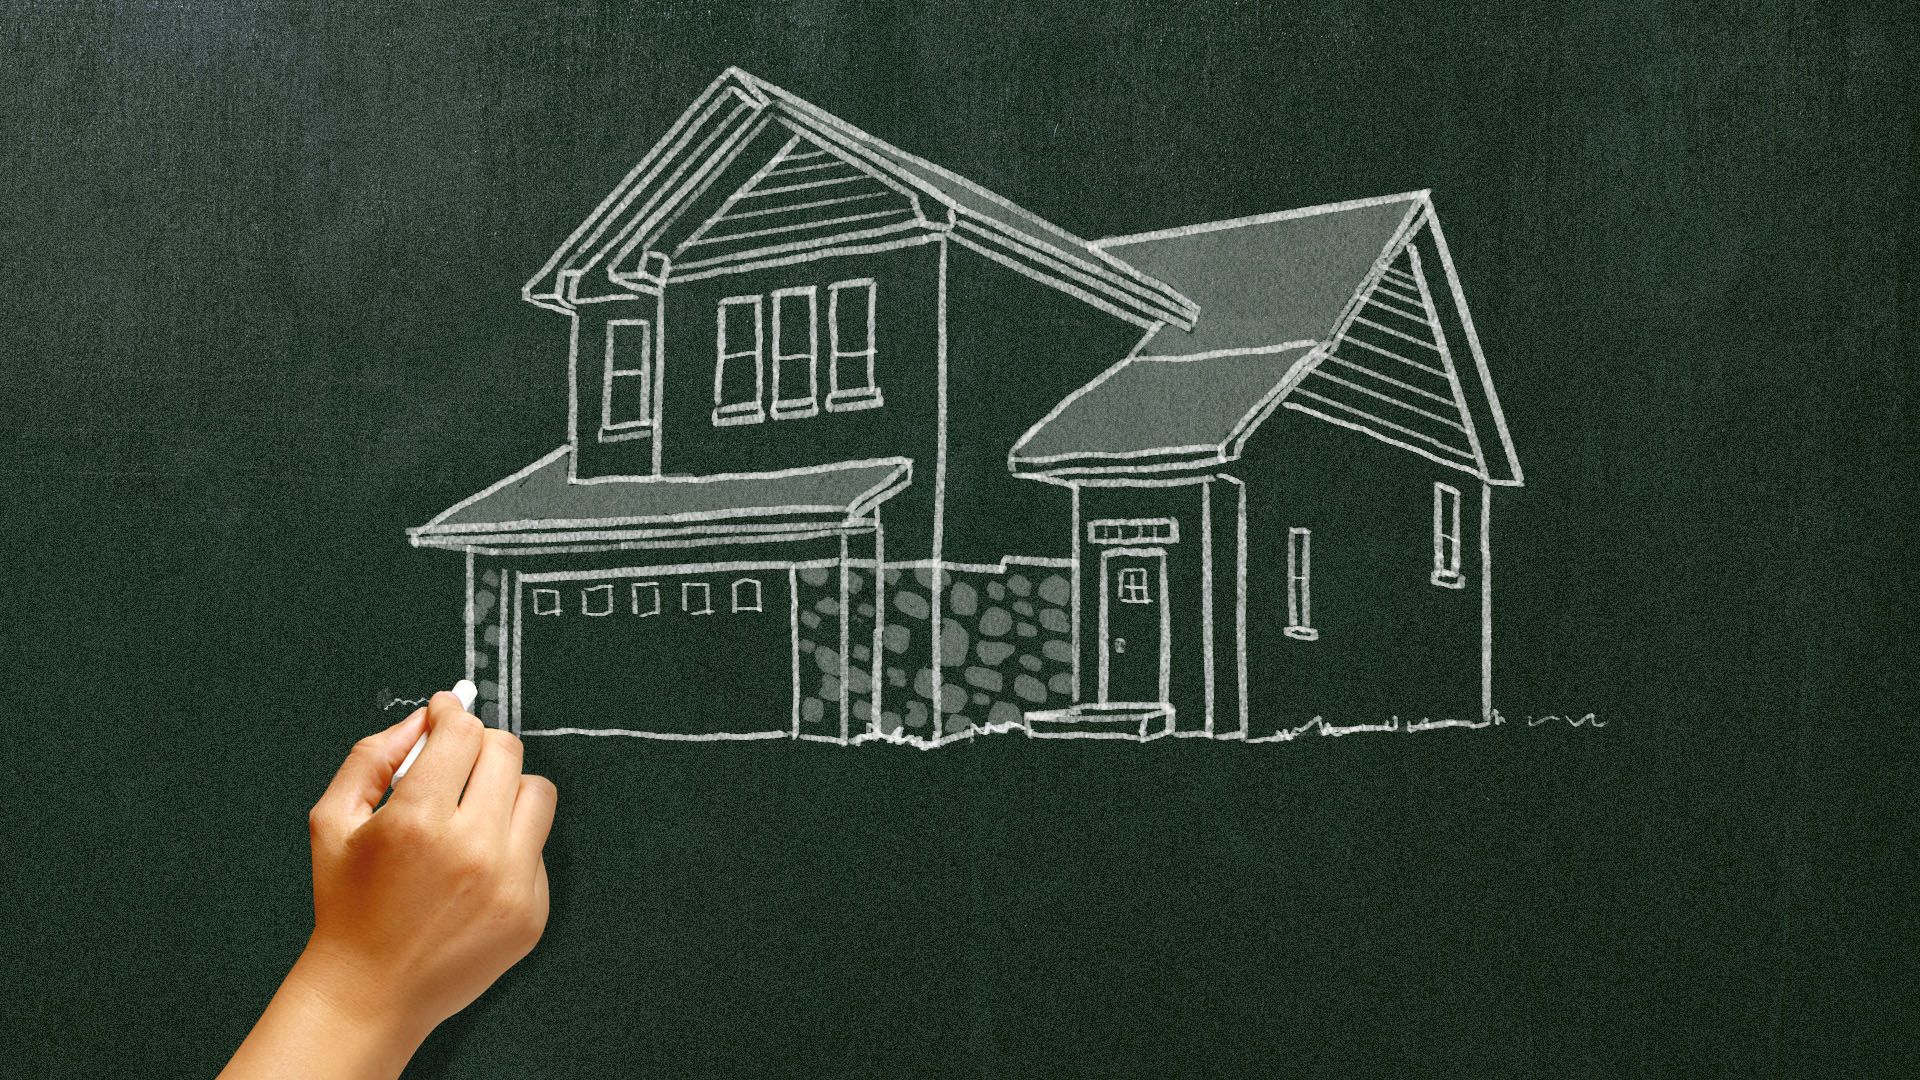 Illustration of a teacher's hand drawing a house on a blackboard